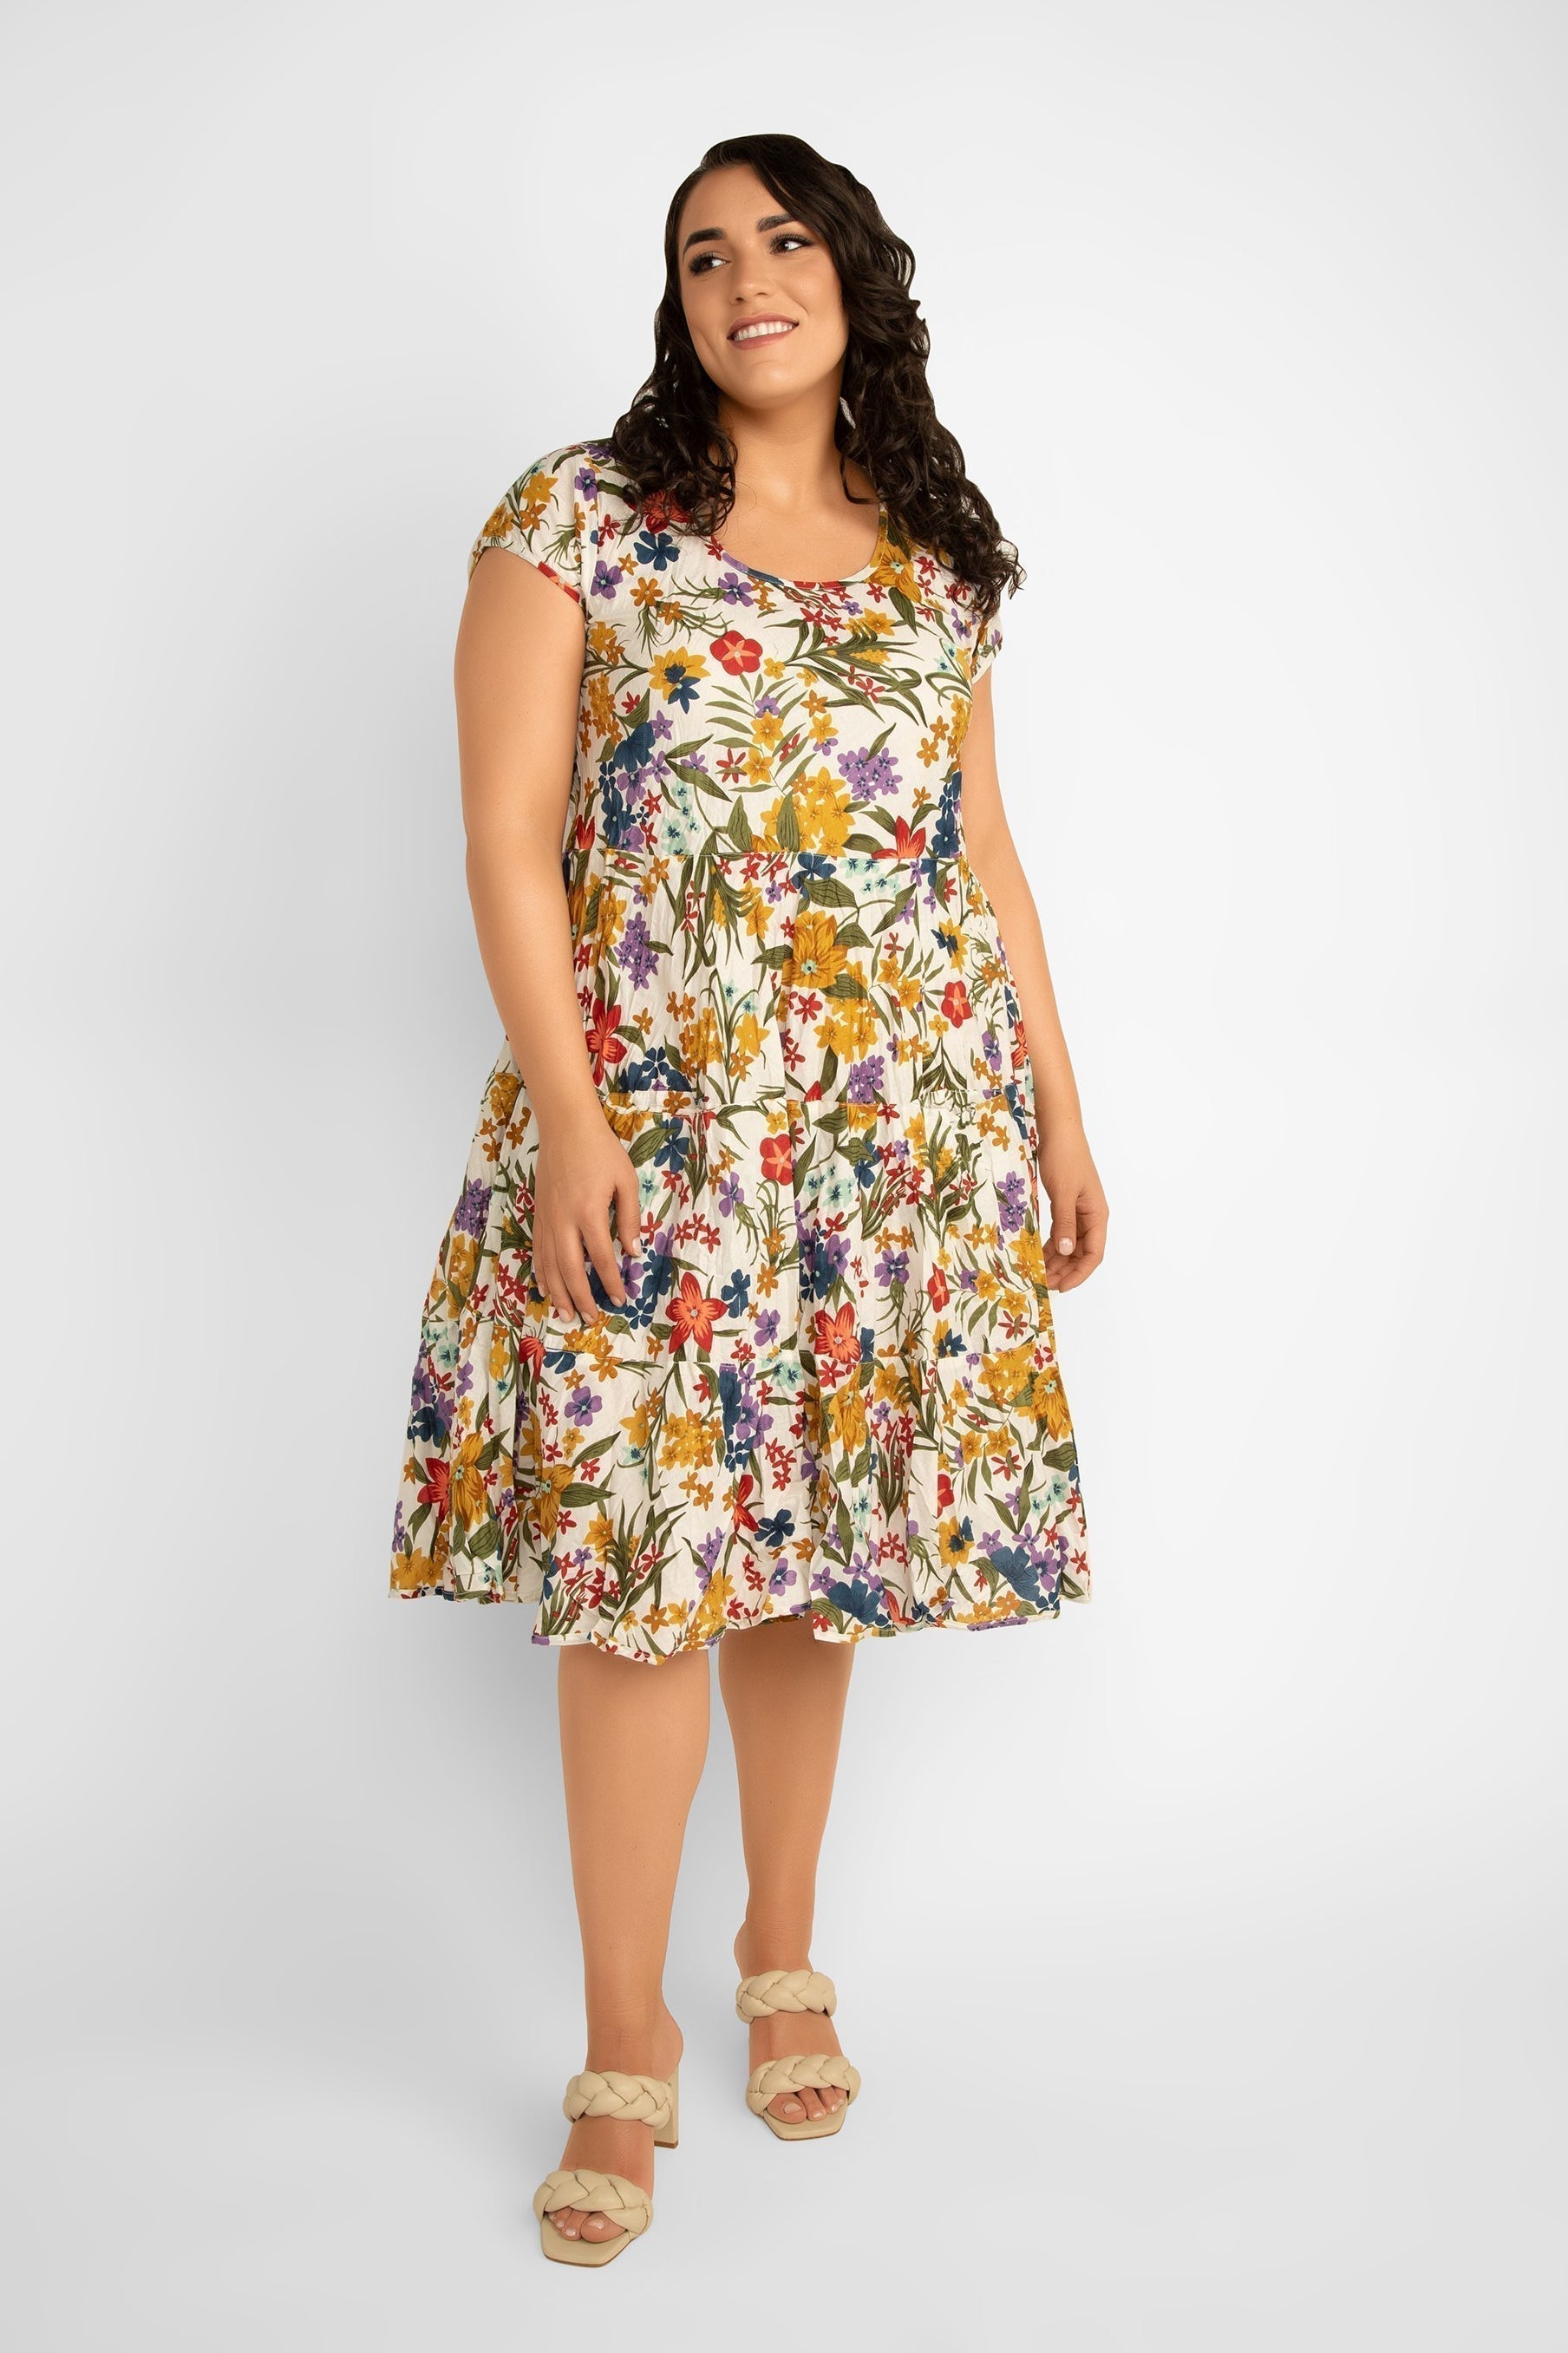 Dress Addict Jade Short Sleeve Round Neck Printed Midi Dress with Pockets  in yellow and multicoloured floral print